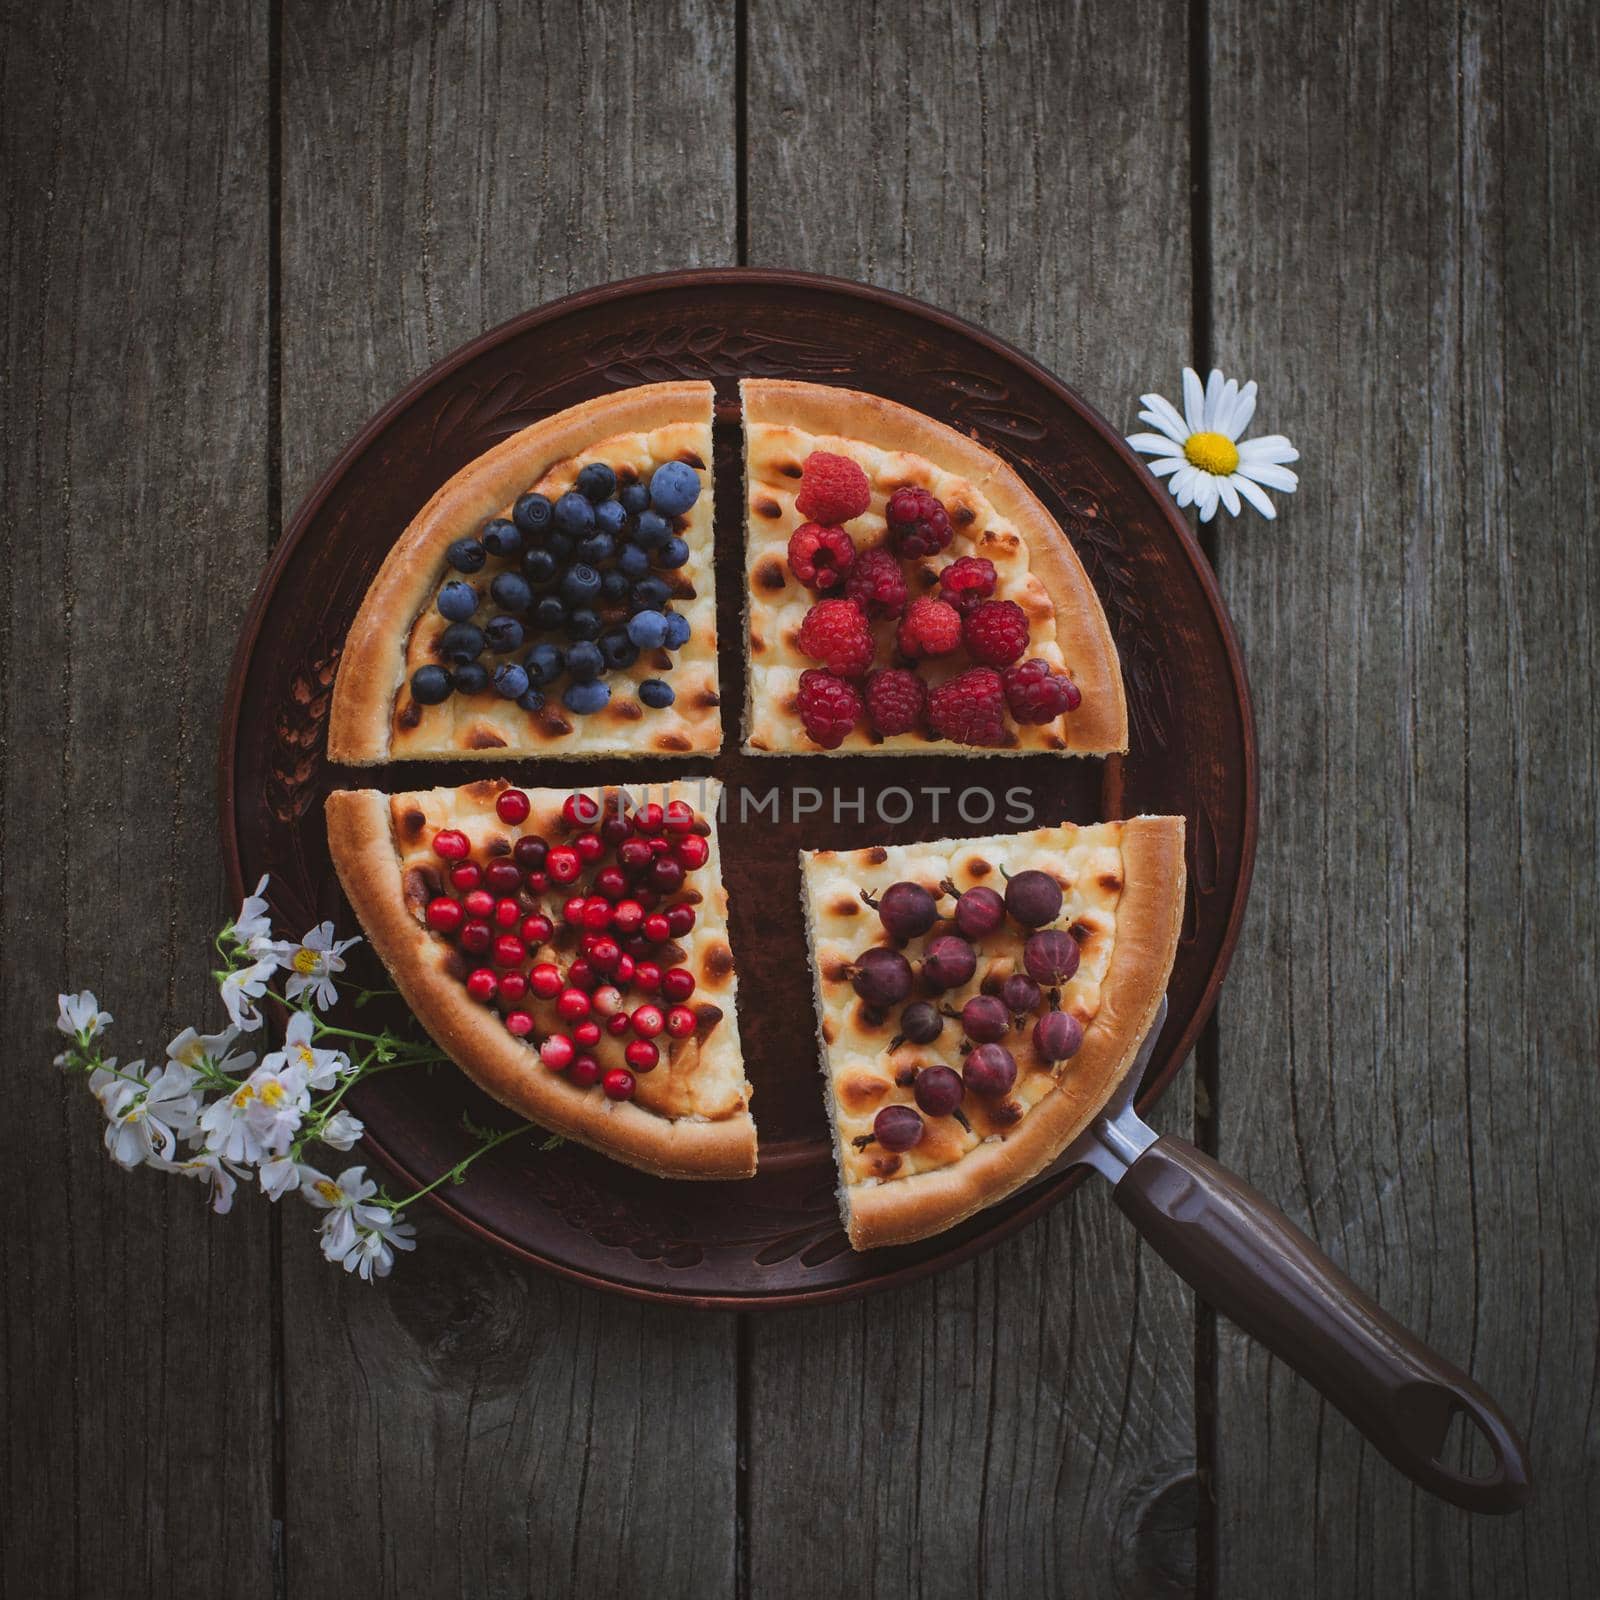 Homemade cheesecake Pie with berries and flowers On plate on Wooden Background